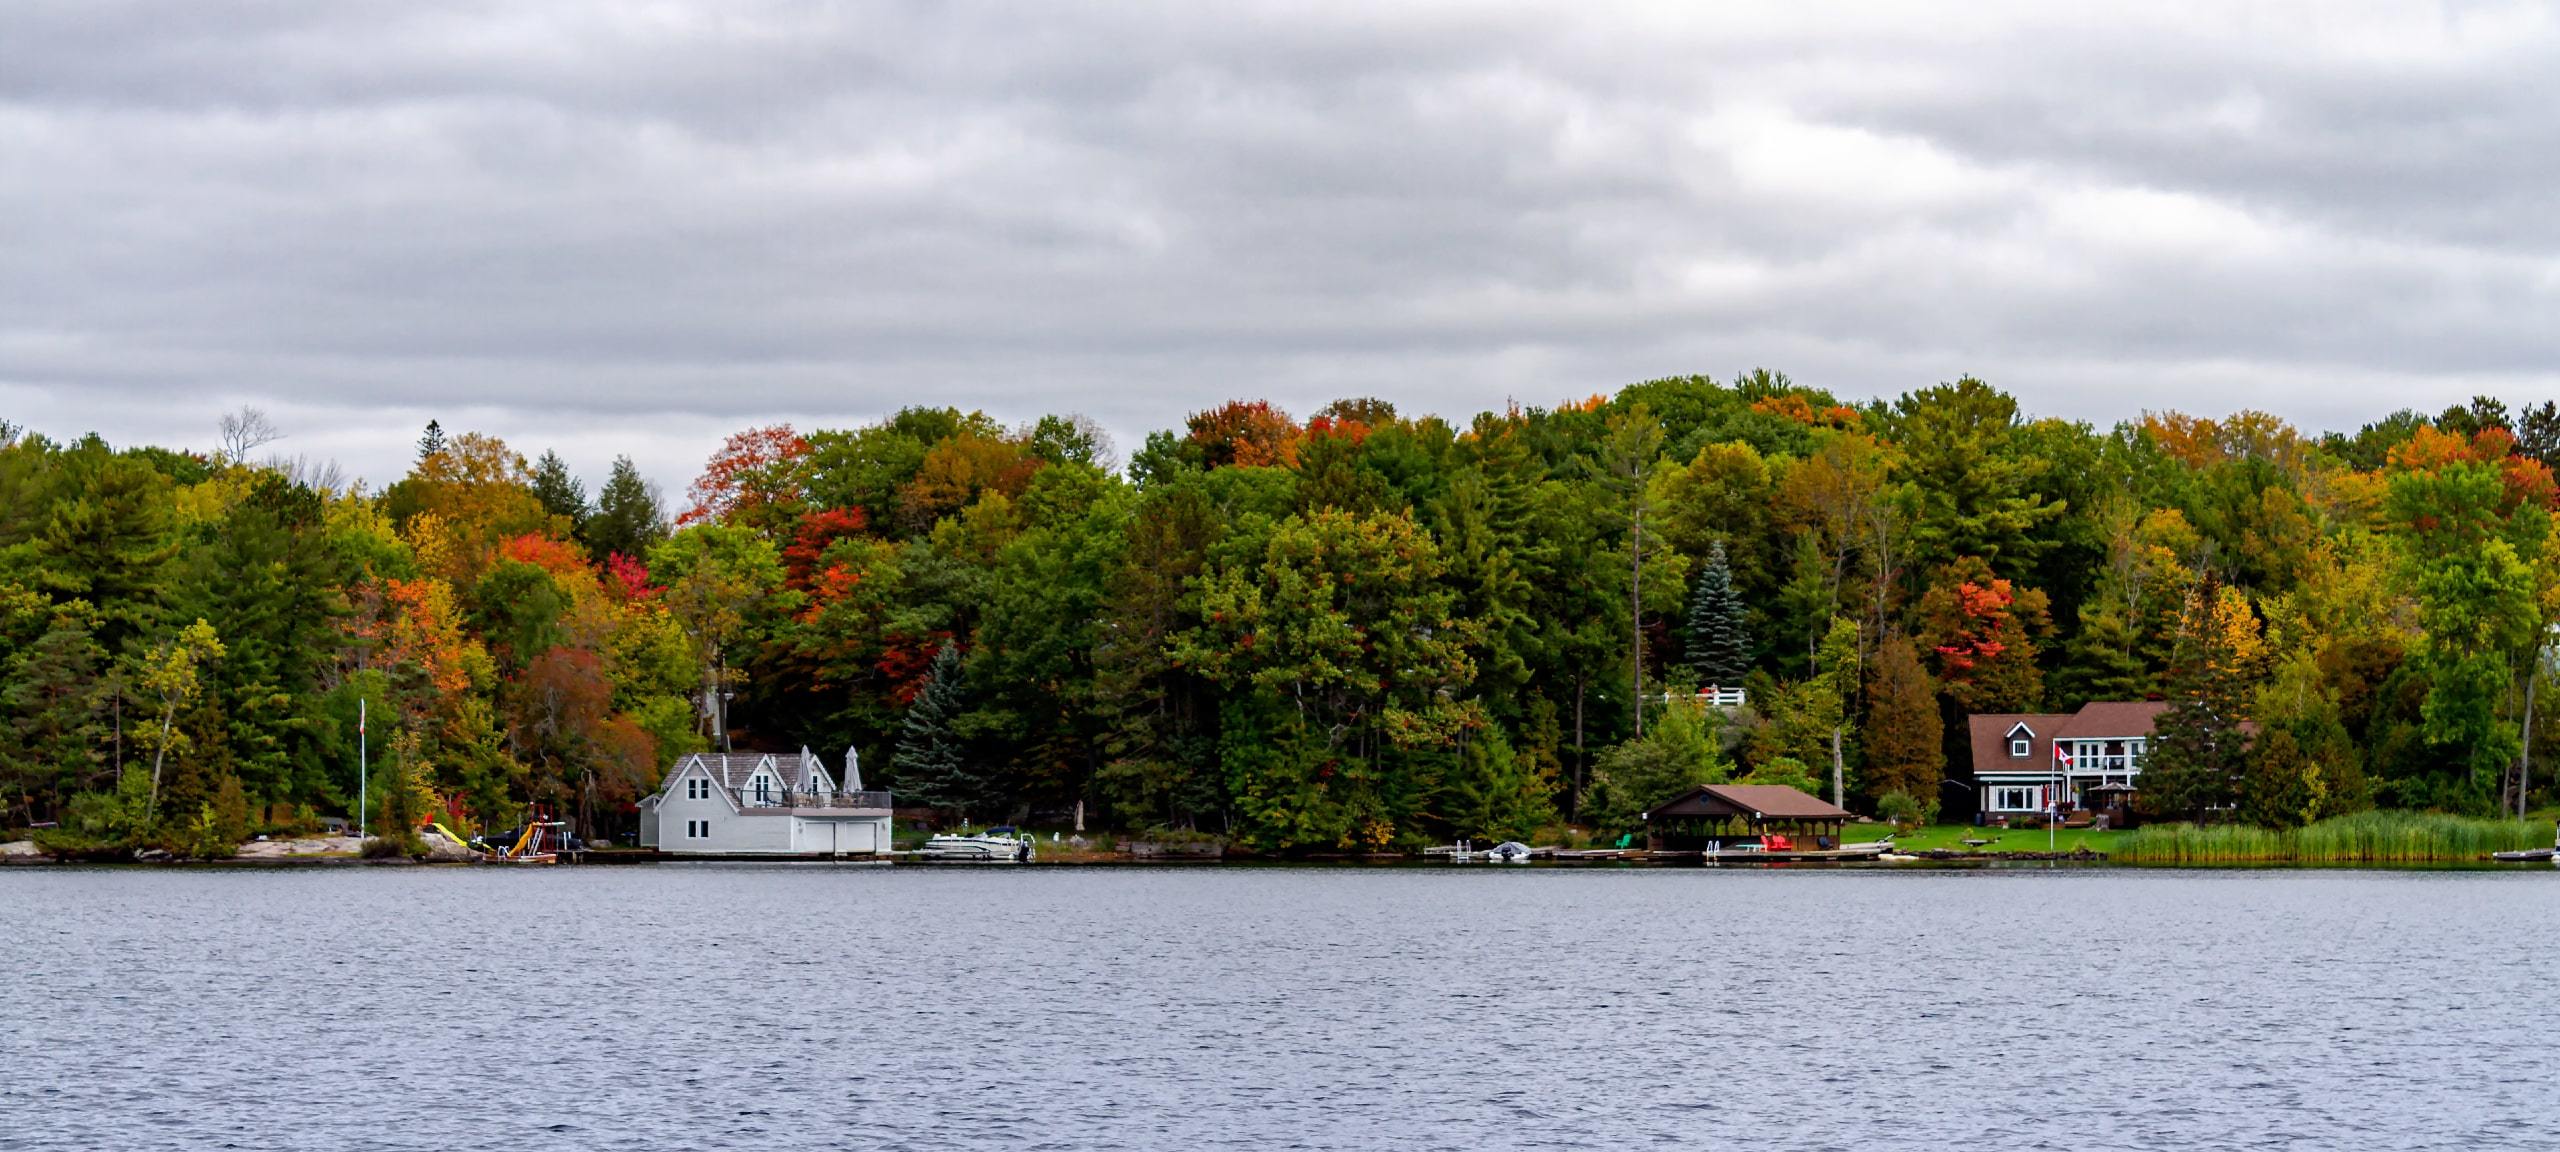 Waterfront homes in Gravenhurst, ON during autumn